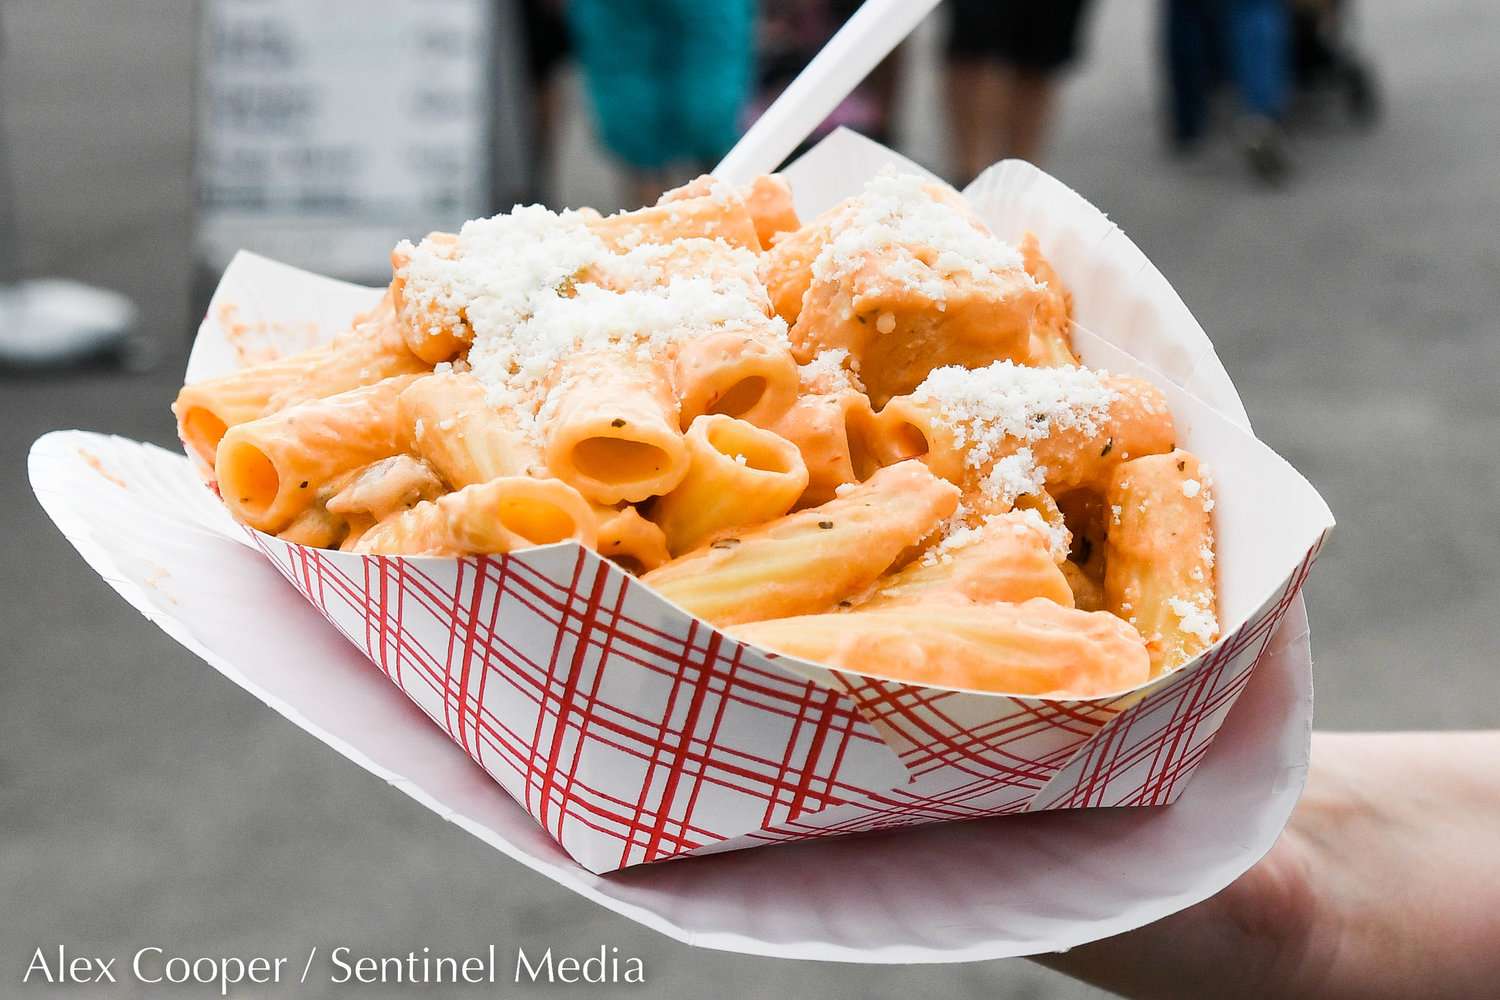 A woman orders chicken riggies at the Herkimer County Fair in Frankfort on Thursday.